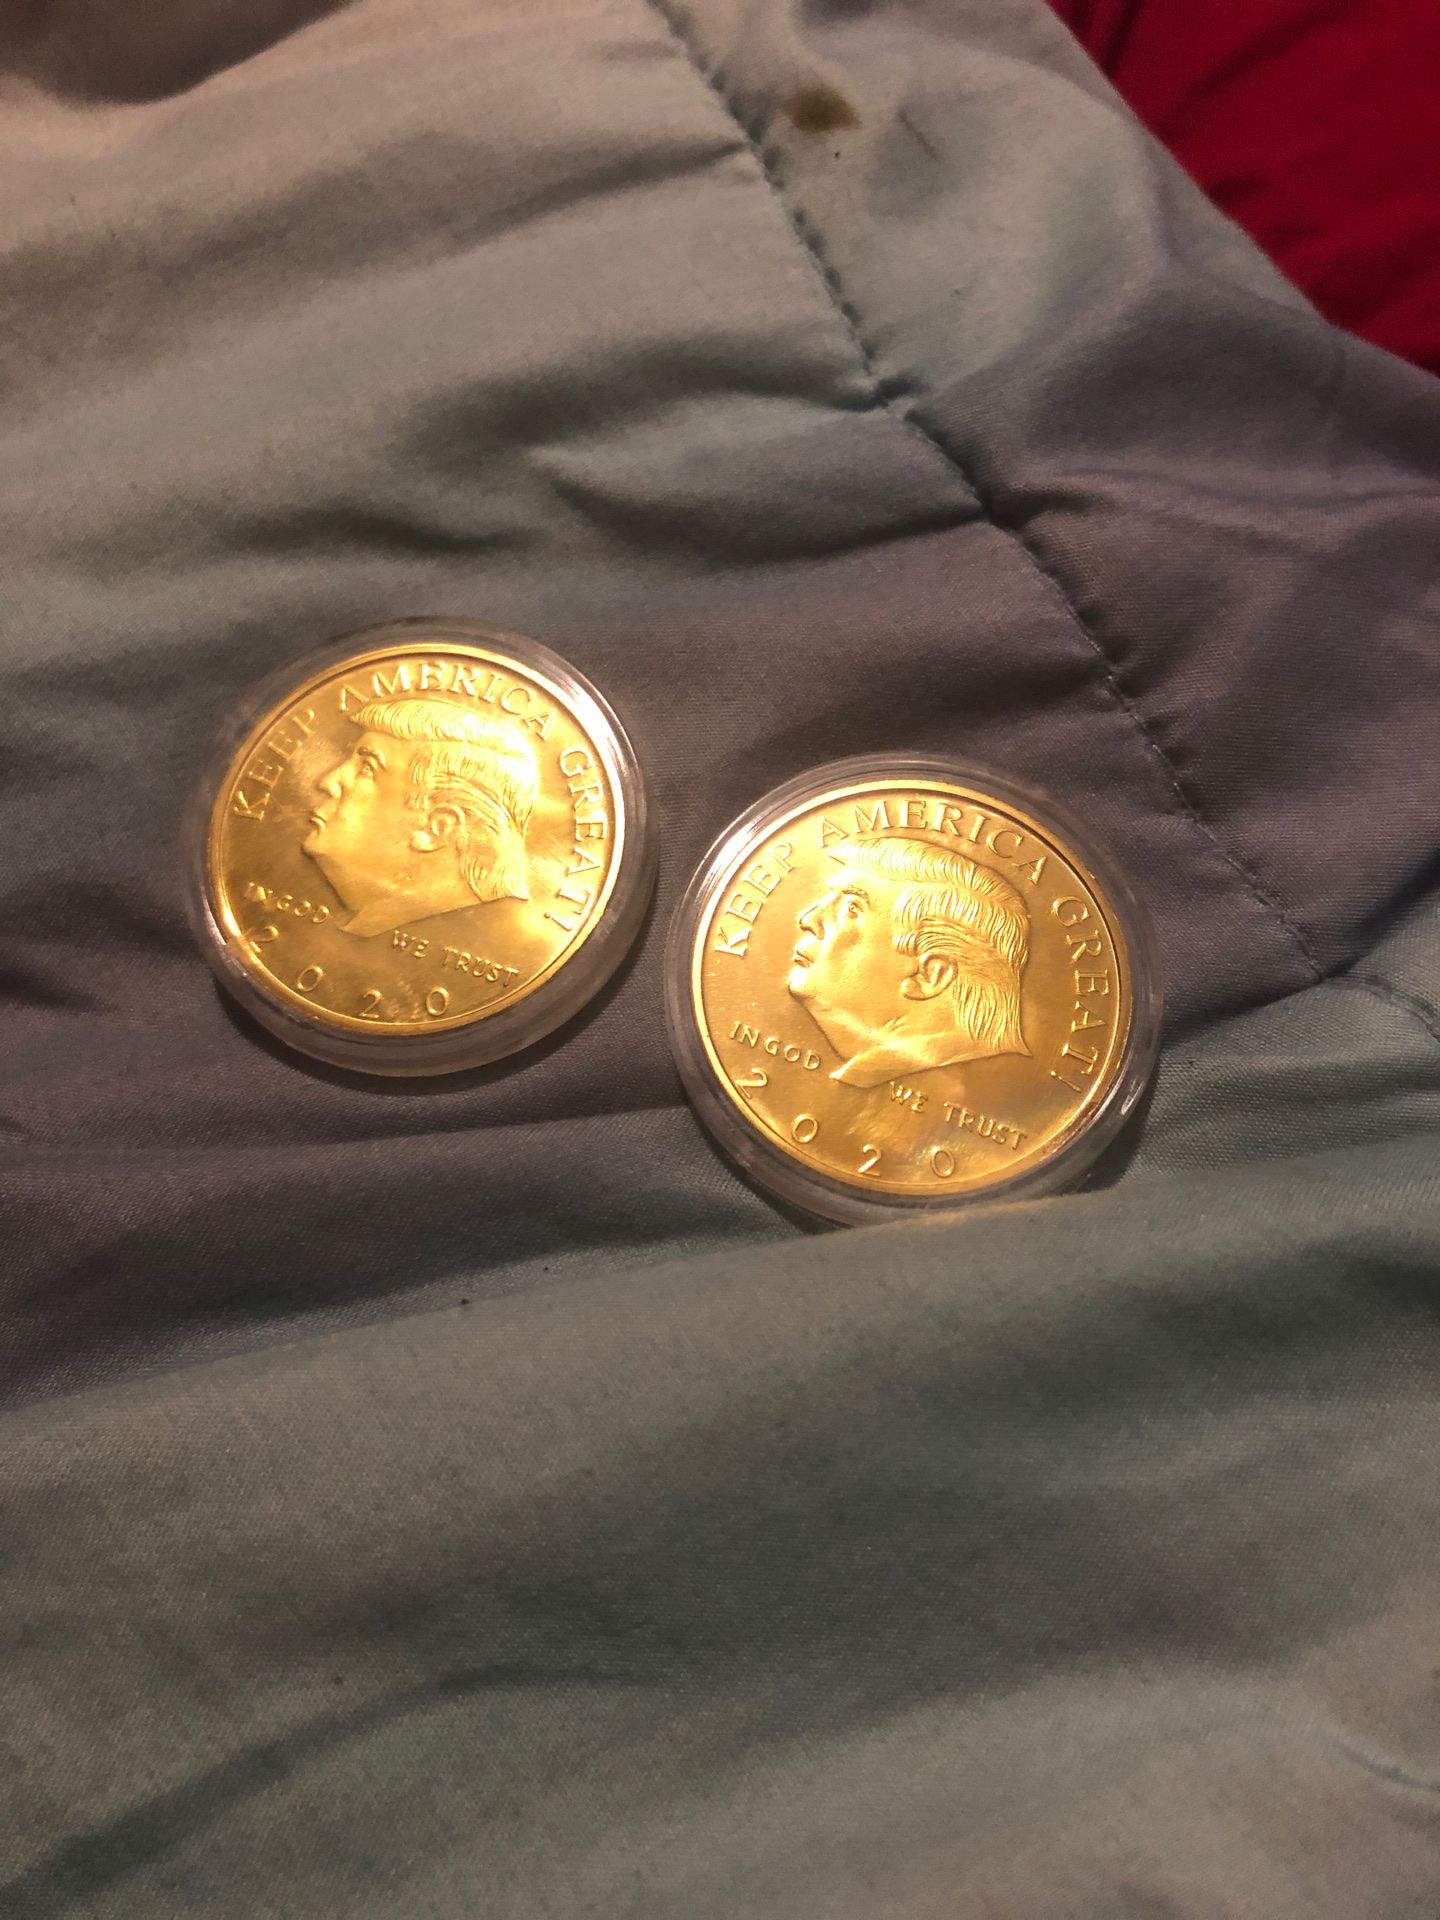 Gold trump 2020 collectors coins (best offer)